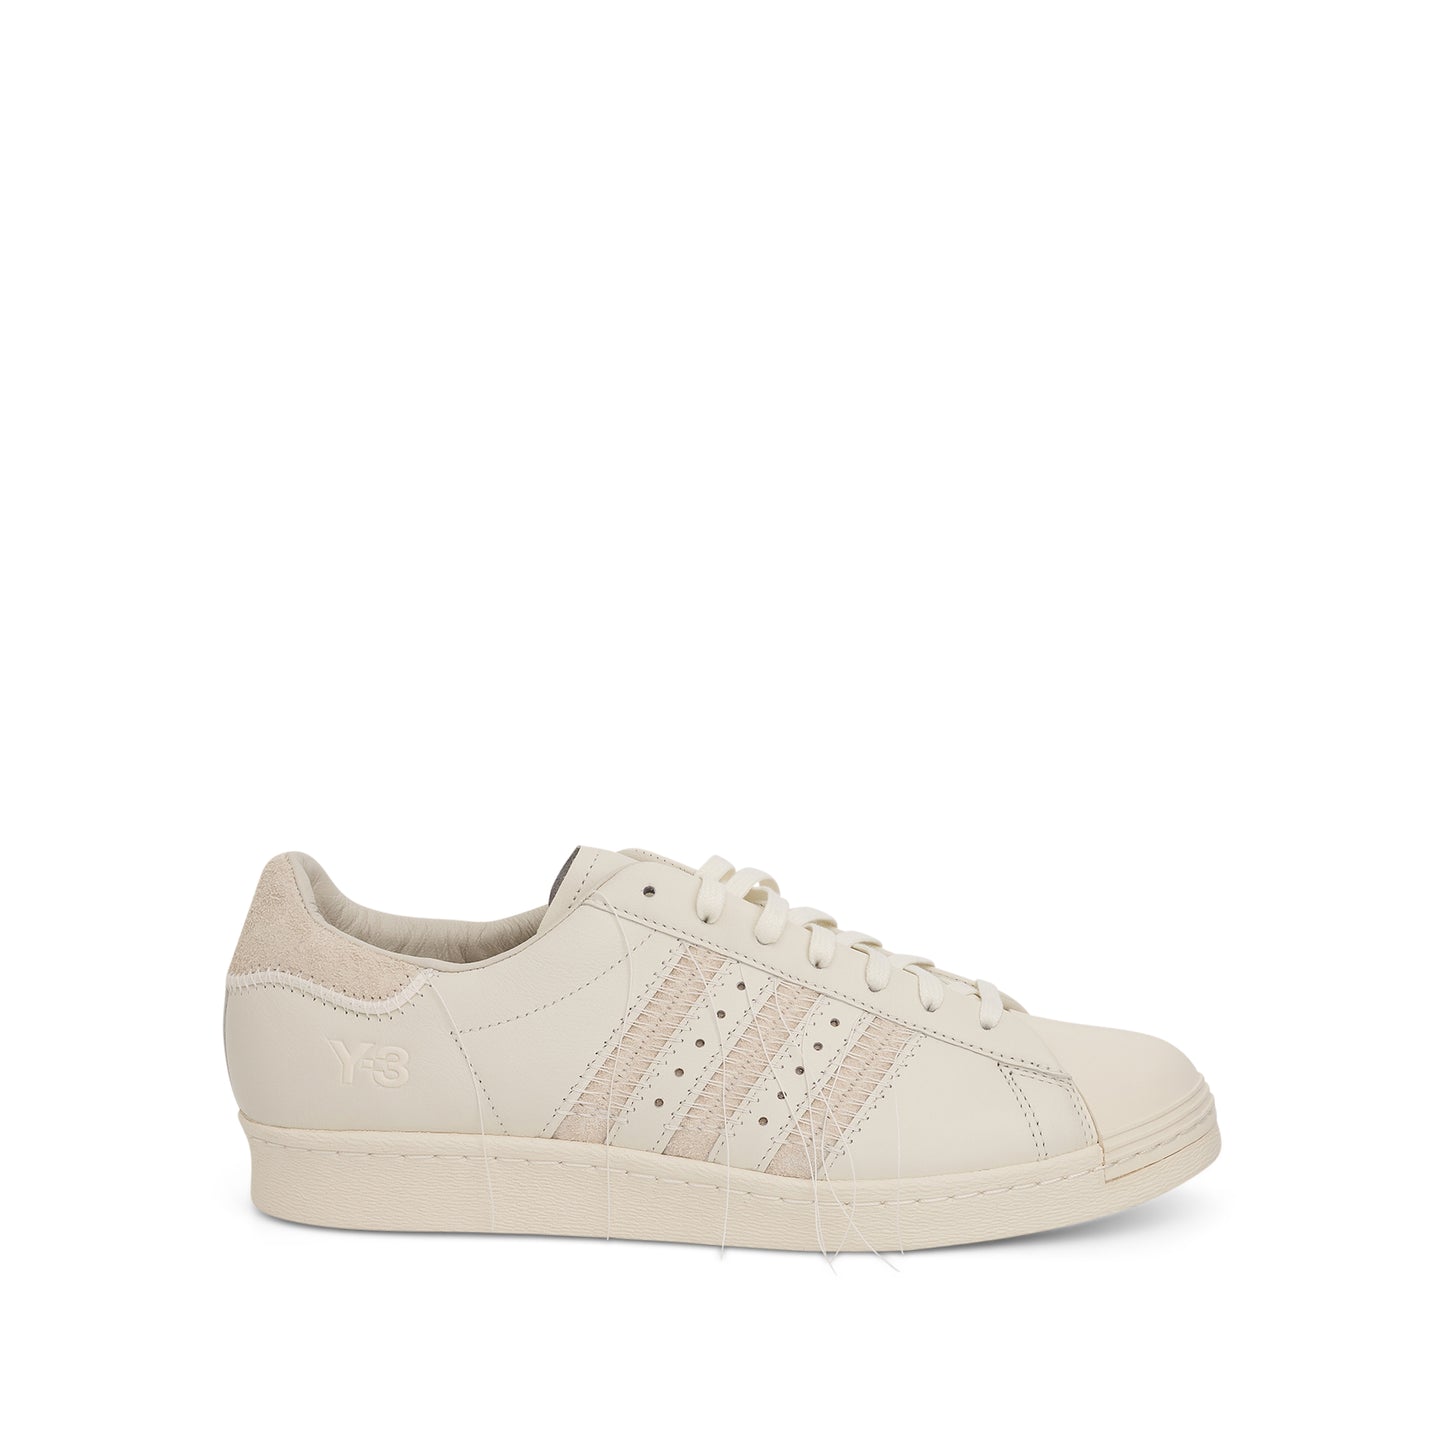 Superstar Sneakers in White